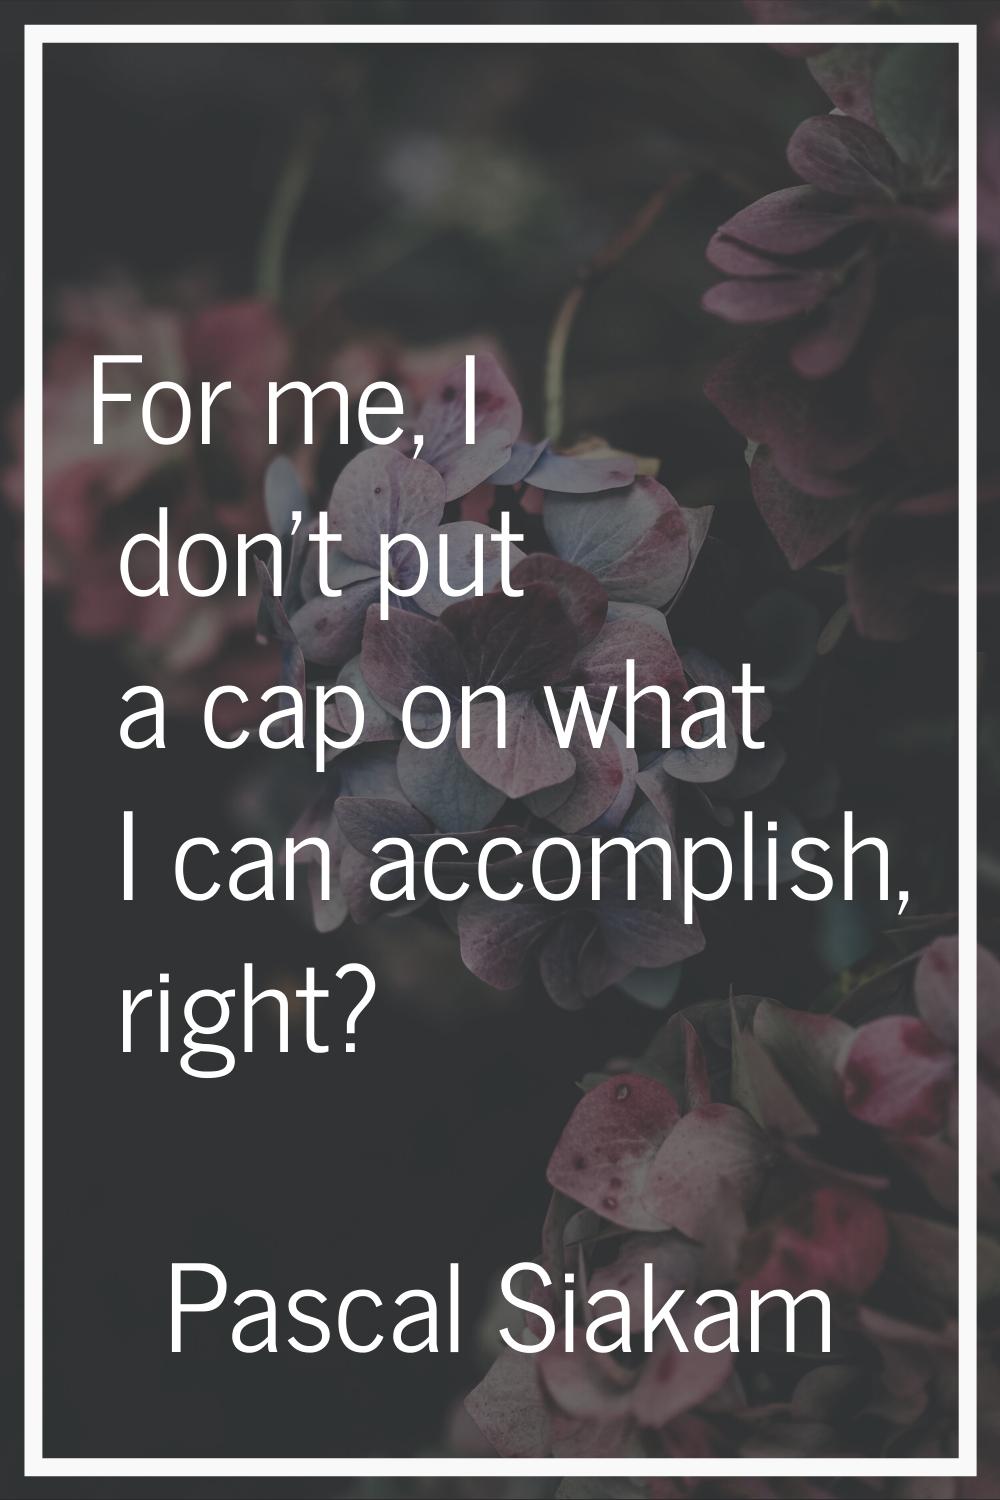 For me, I don't put a cap on what I can accomplish, right?